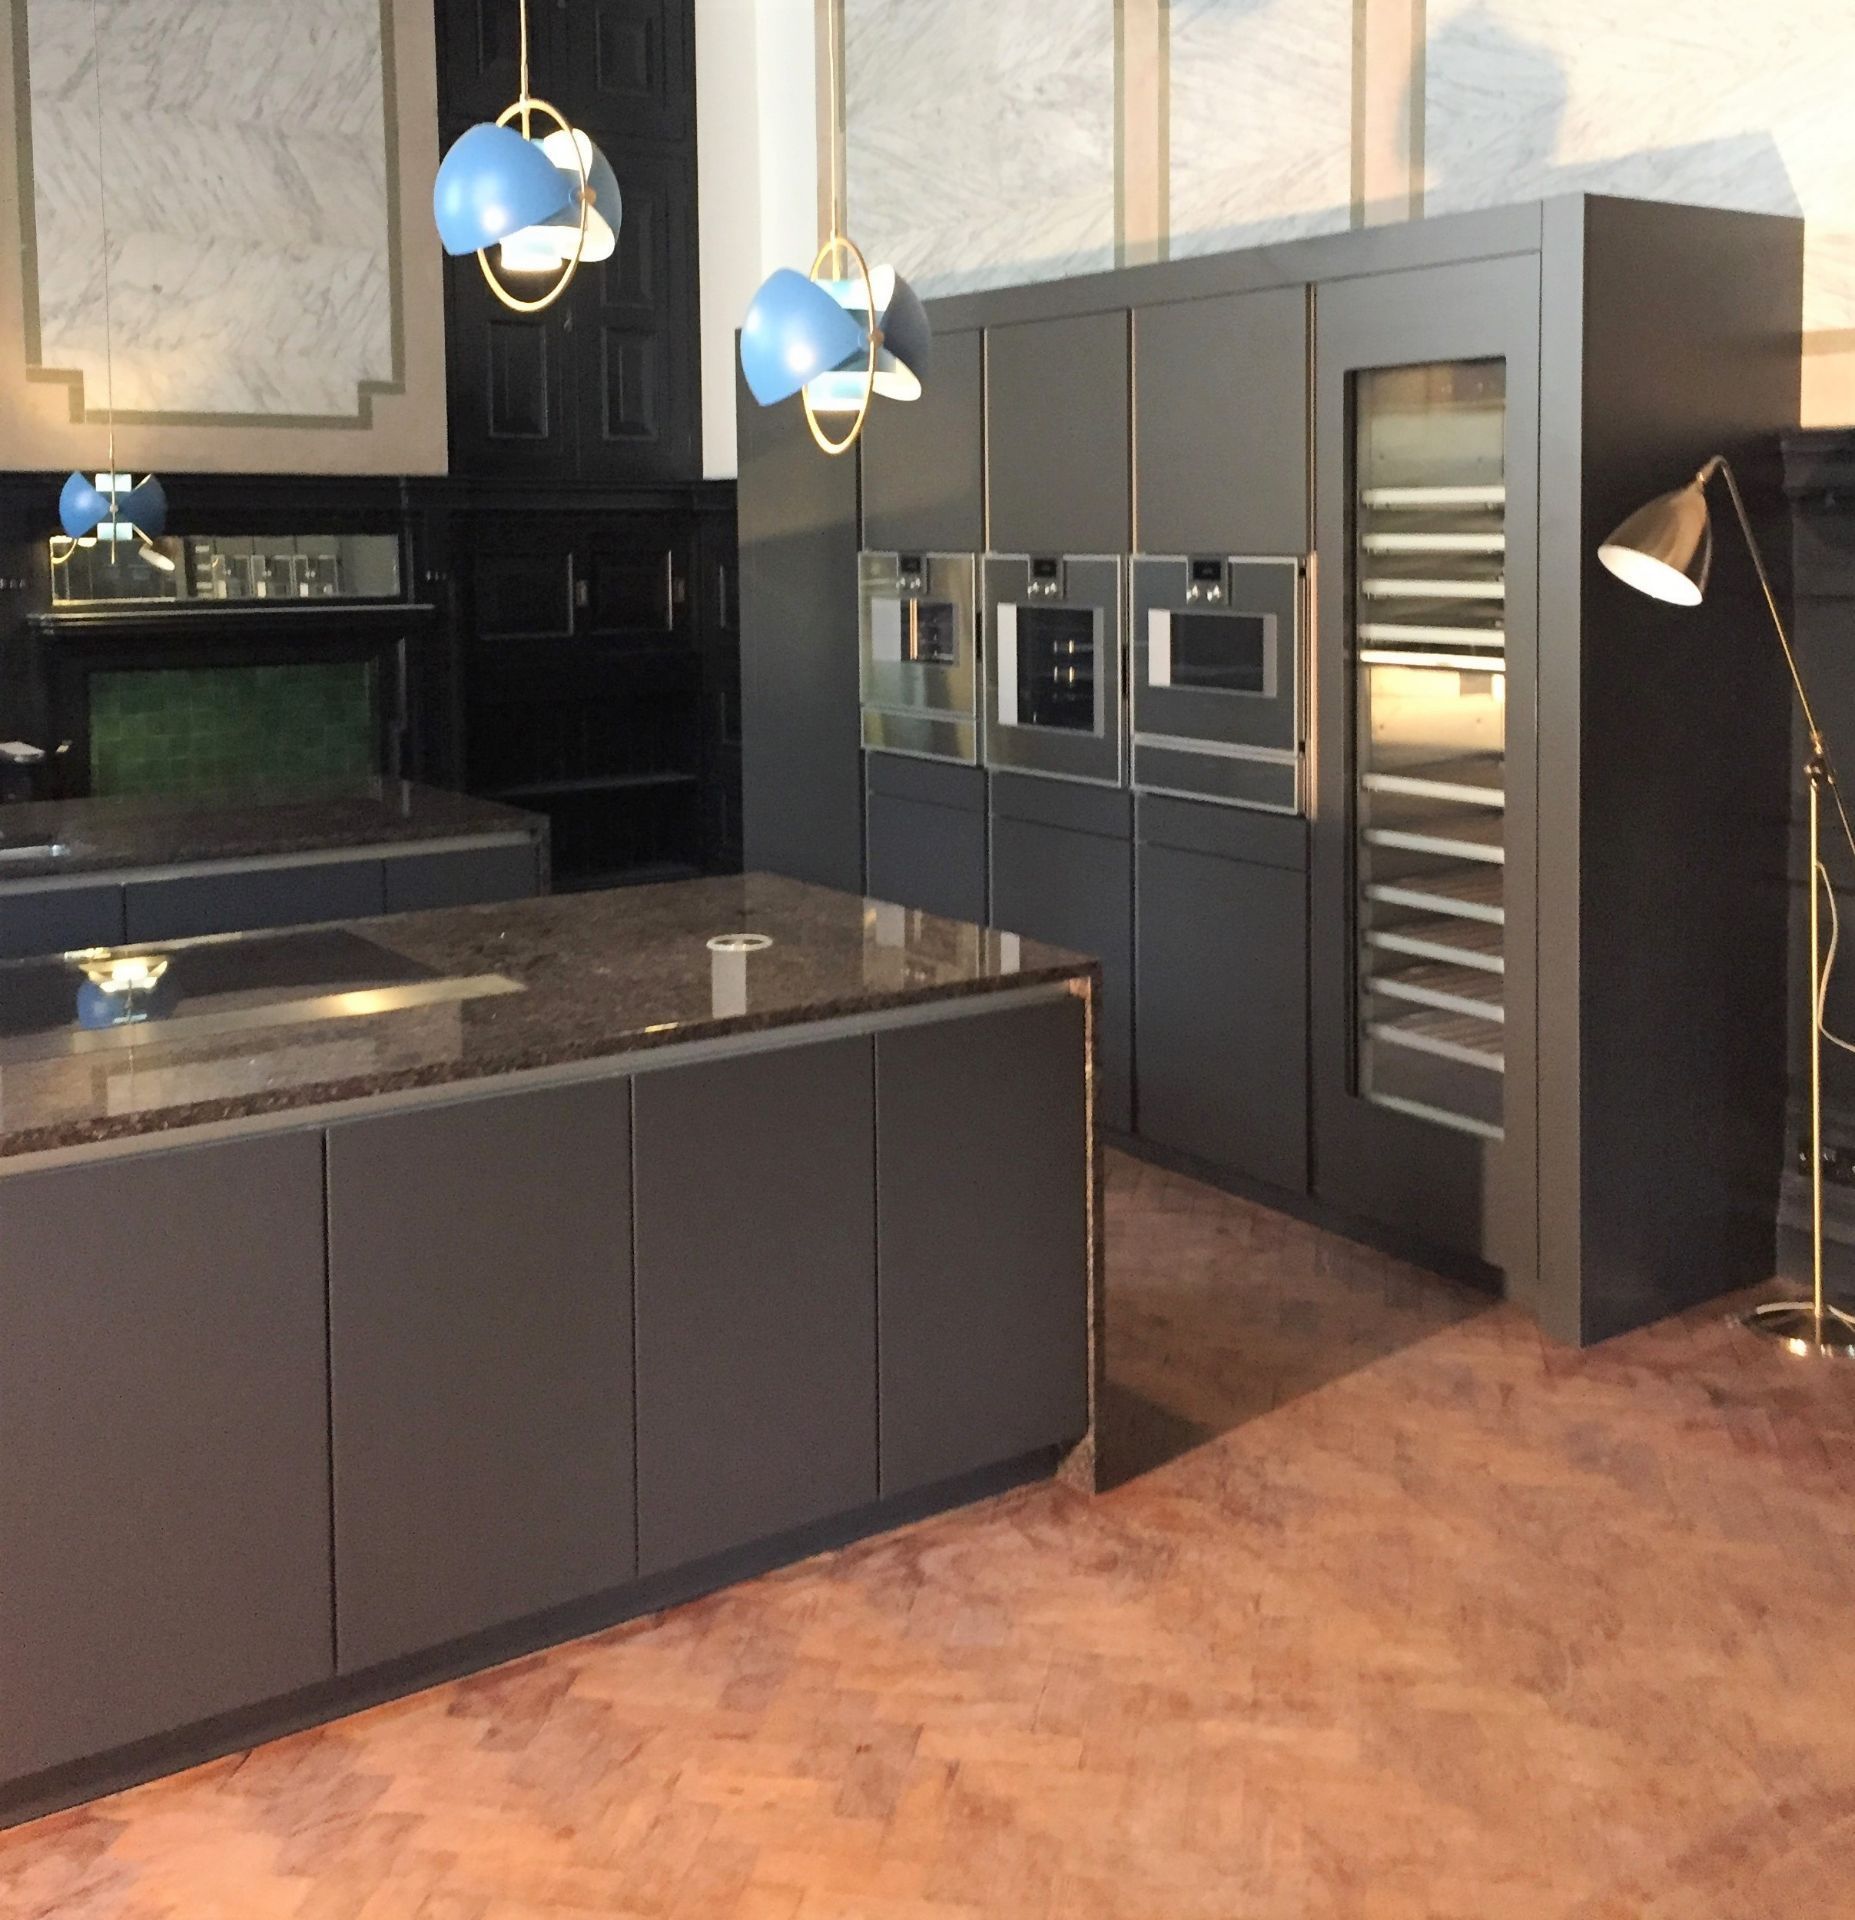 1 x SieMatic Fitted Kitchen in Basalt Grey Matt With Handleless Doors - Features Gaggenau - Image 3 of 10